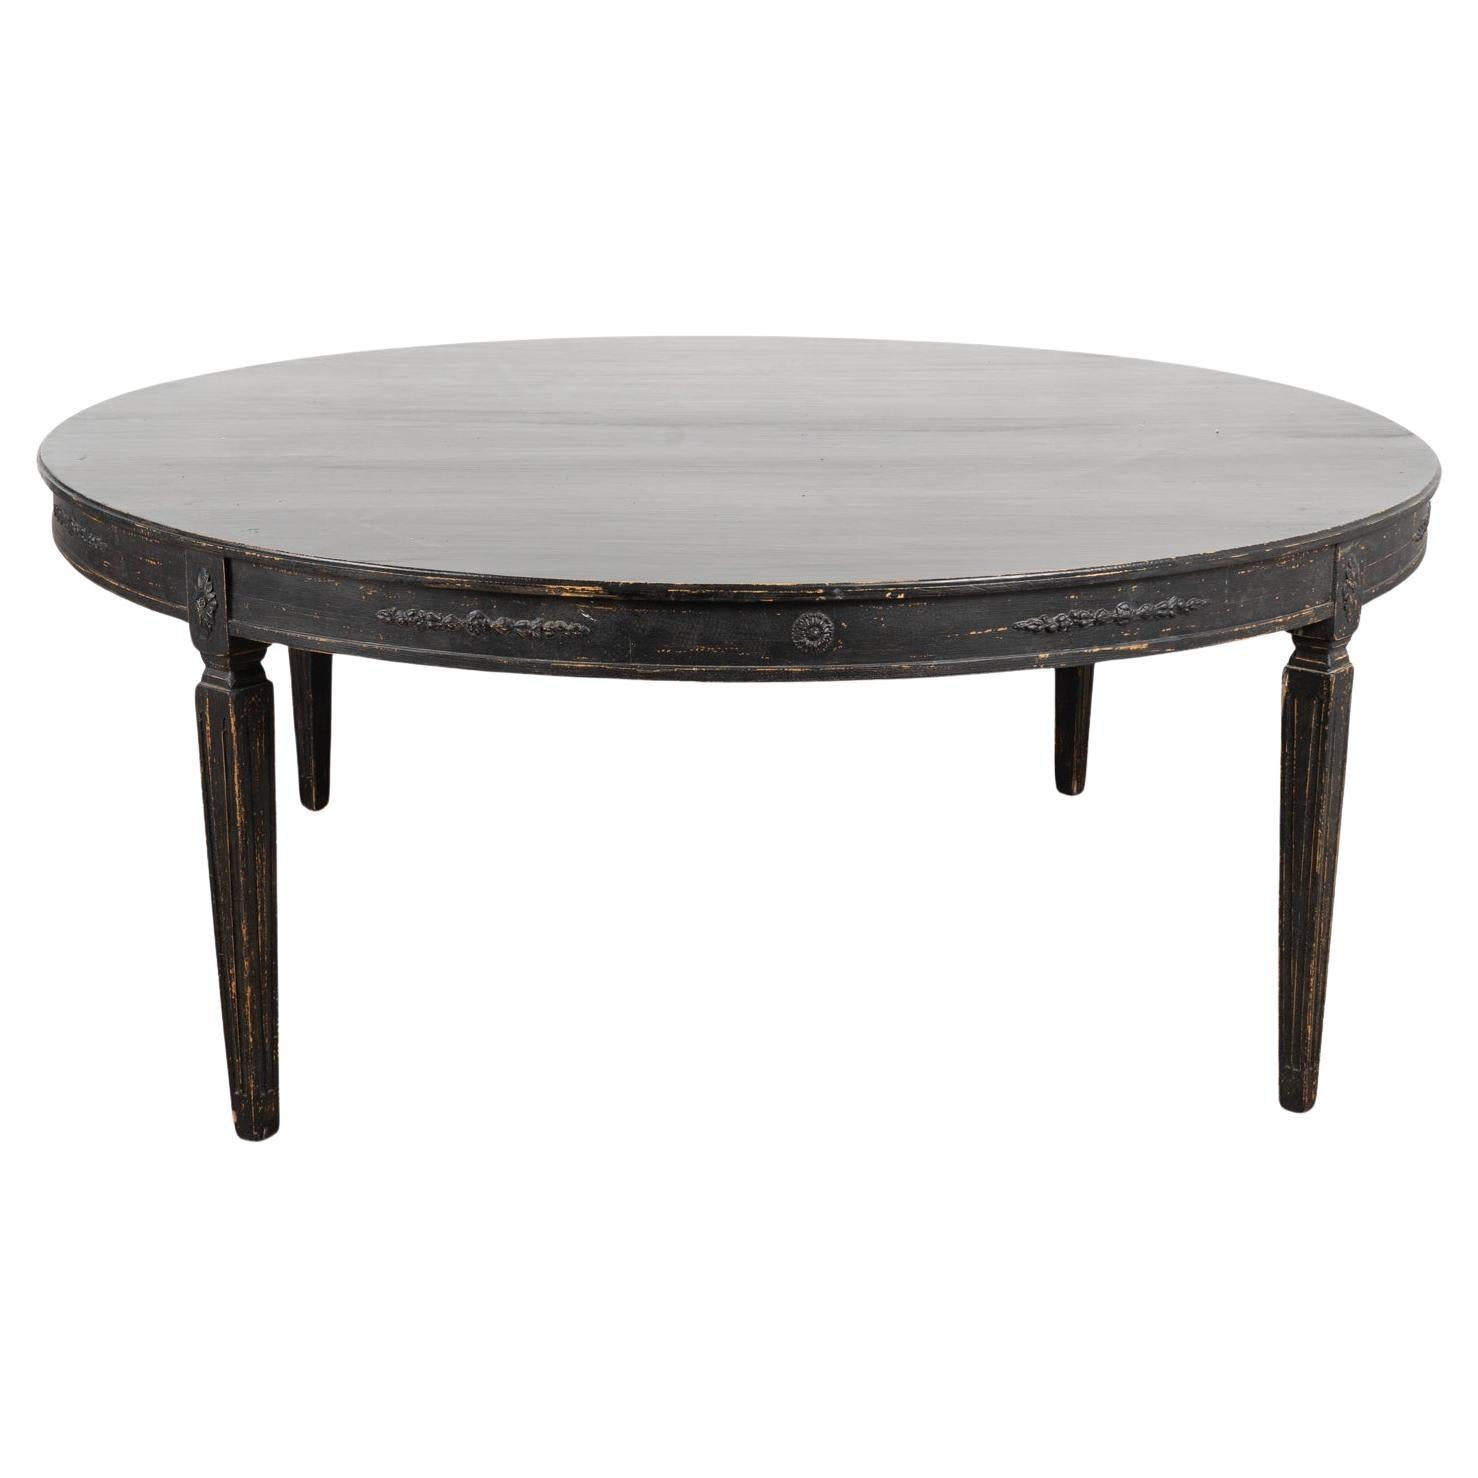 Large Round Gustavian Style Dining Table, reproduction